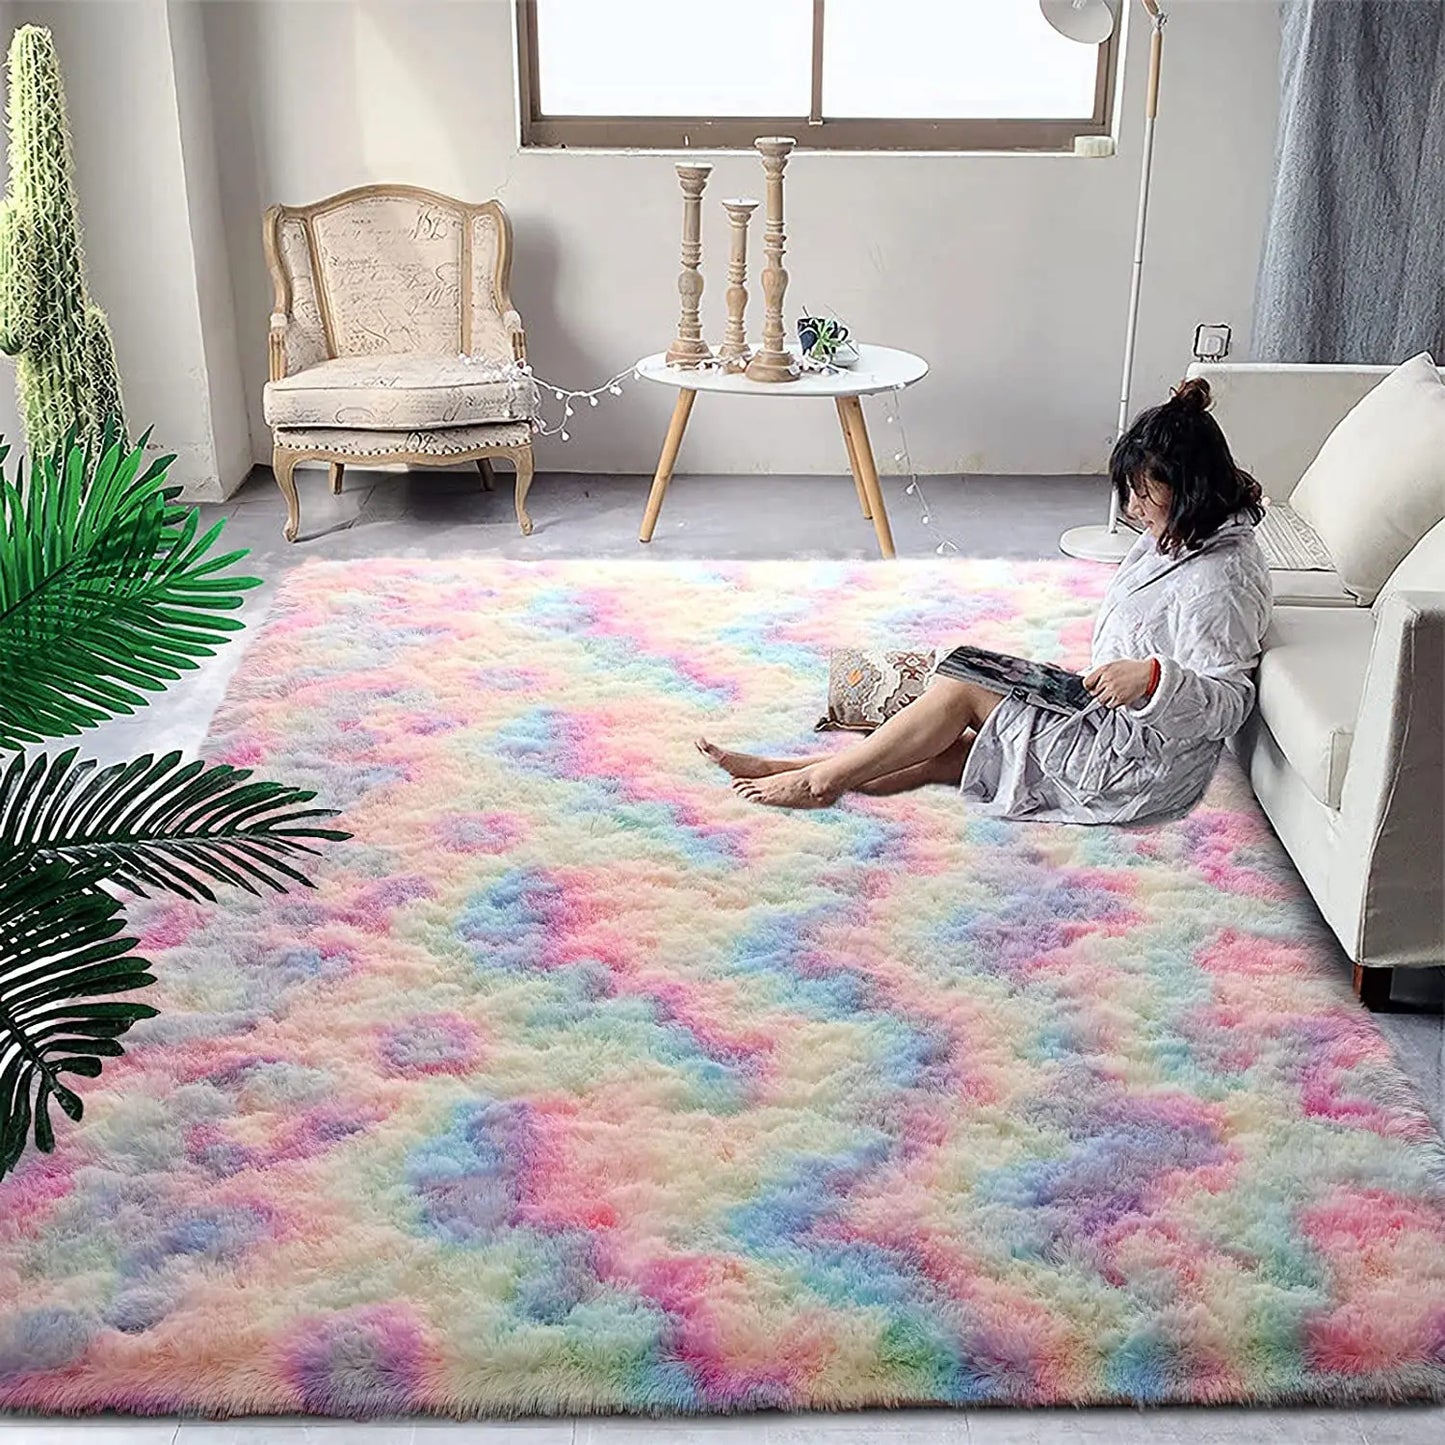 Fluffy plush tie dyed Large carpet Living room decor rug Child non-slip floor mat bedroom Stitch carpets Home decoration rugs ShopOnlyDeal